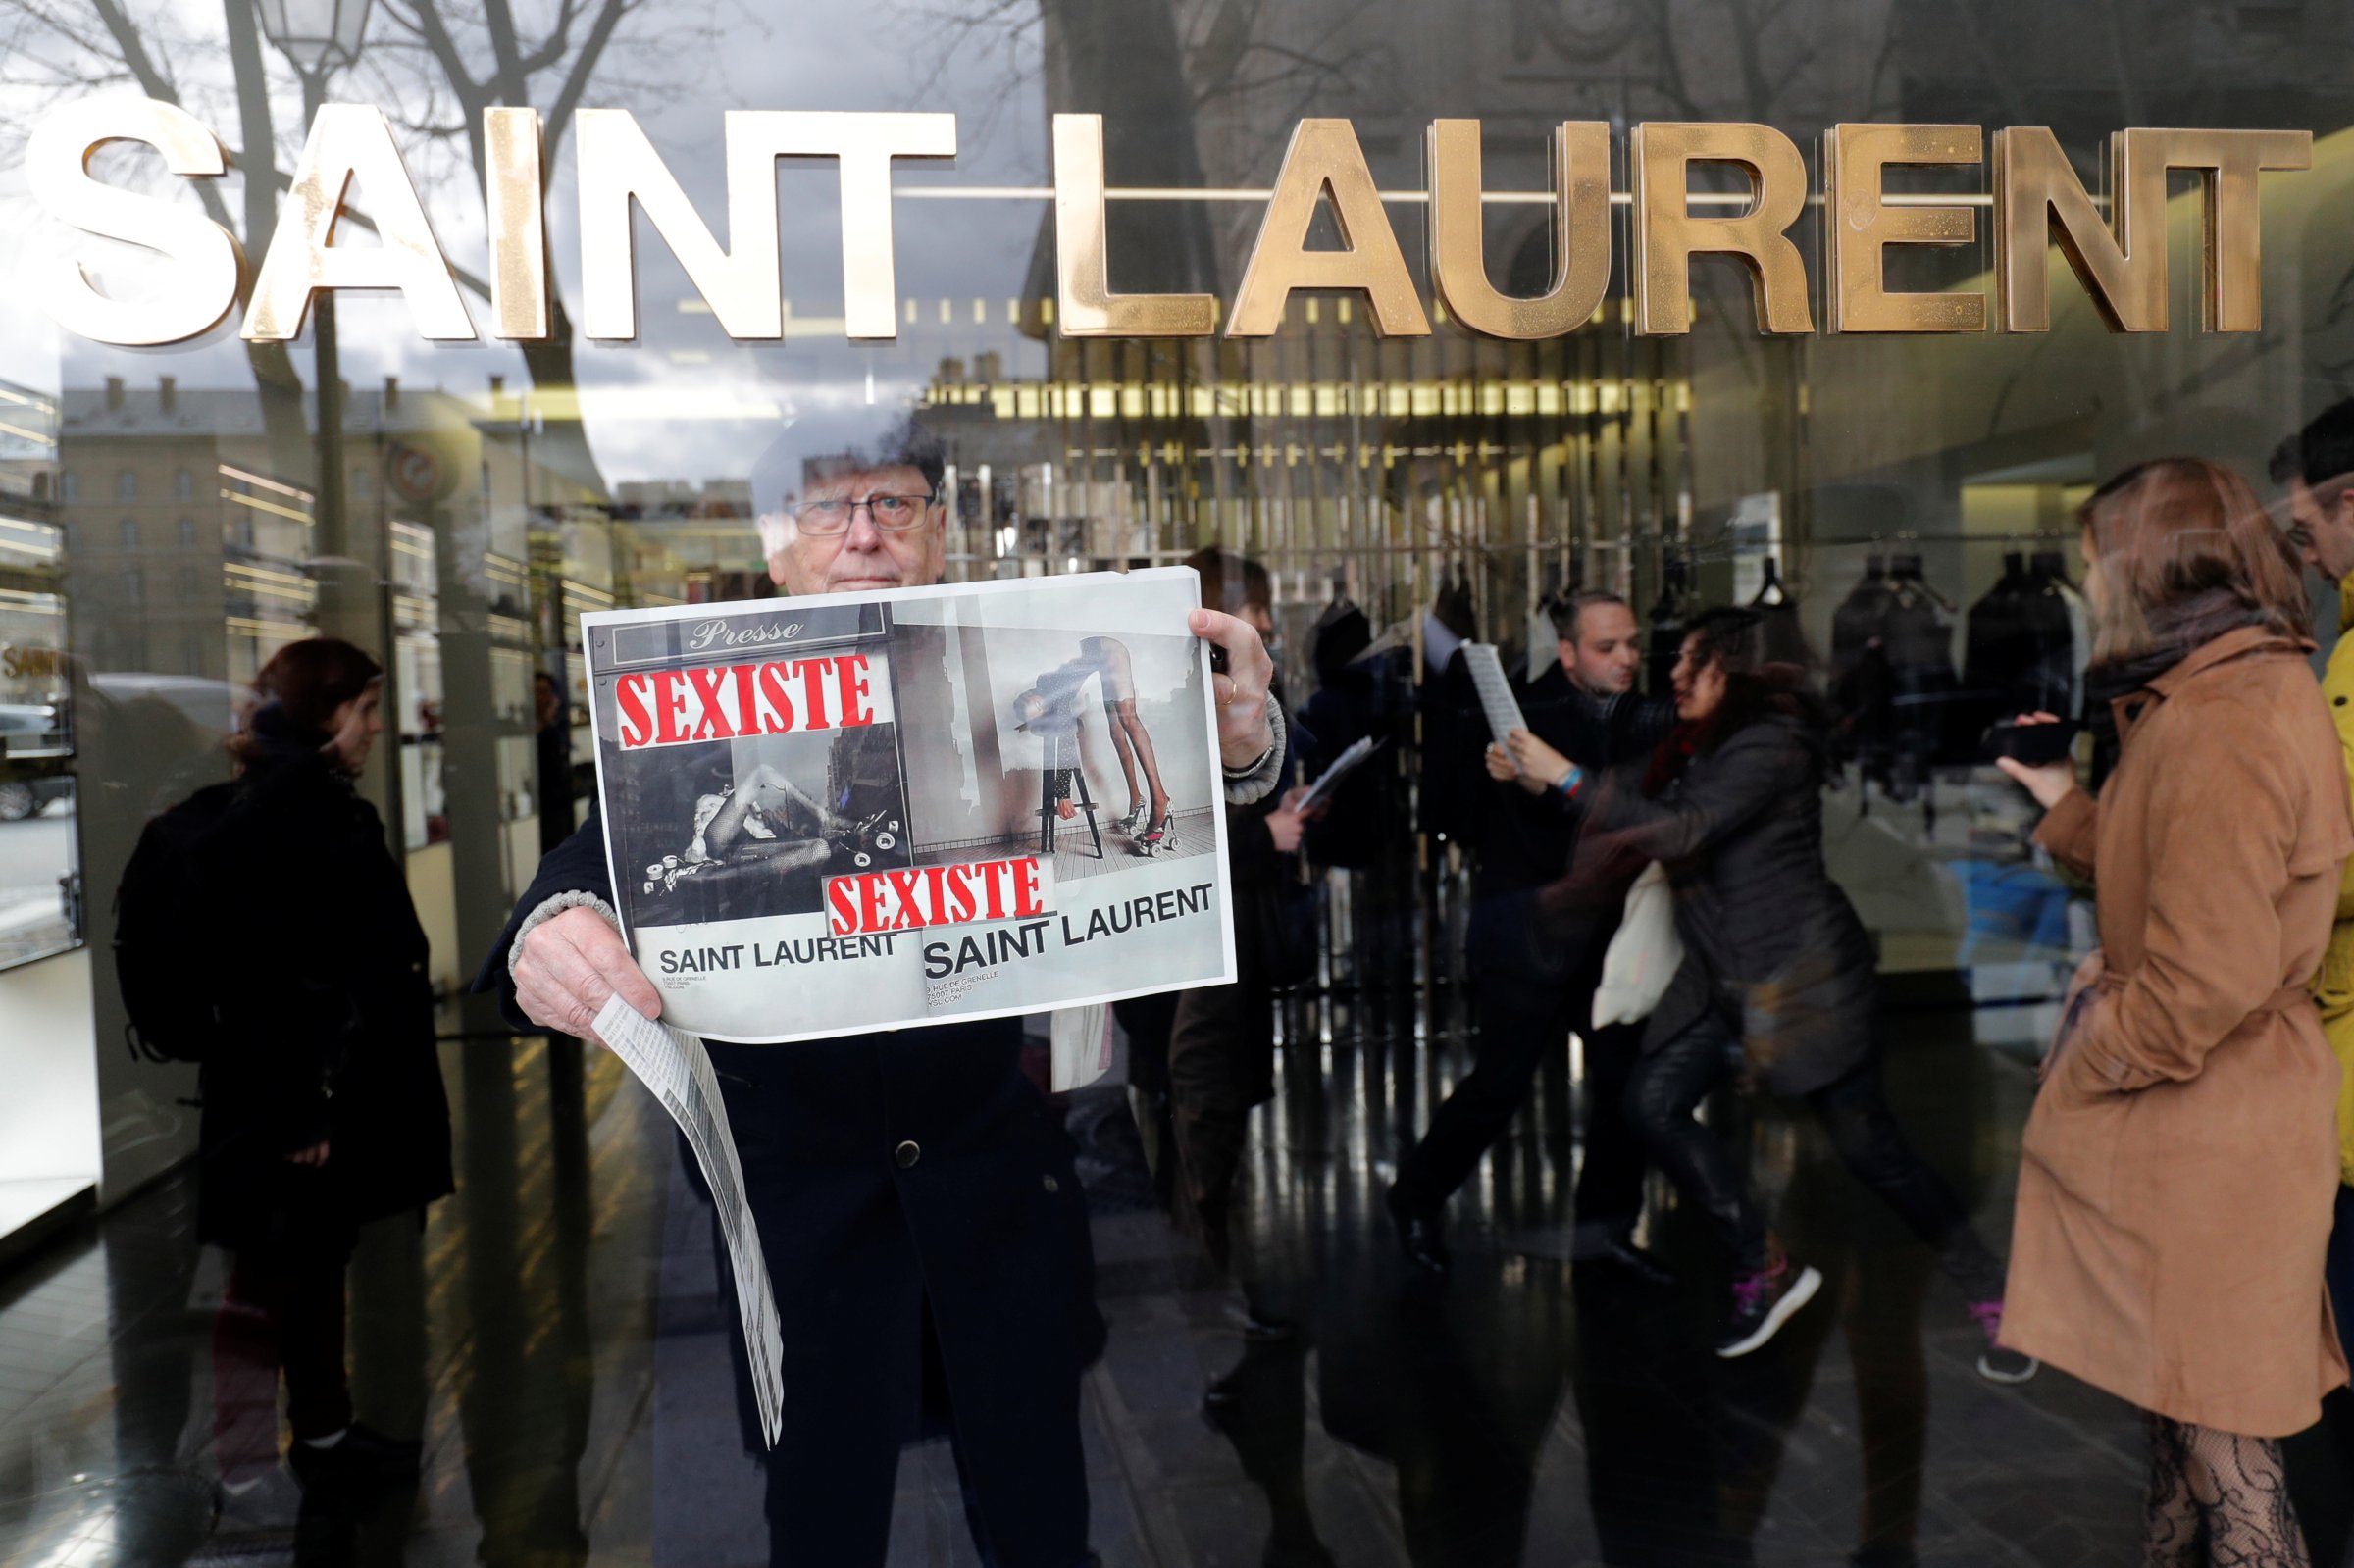 Activists hold placards which read "Sexist" during a demonstration in front of a Yves Saint Laurent shop in Paris